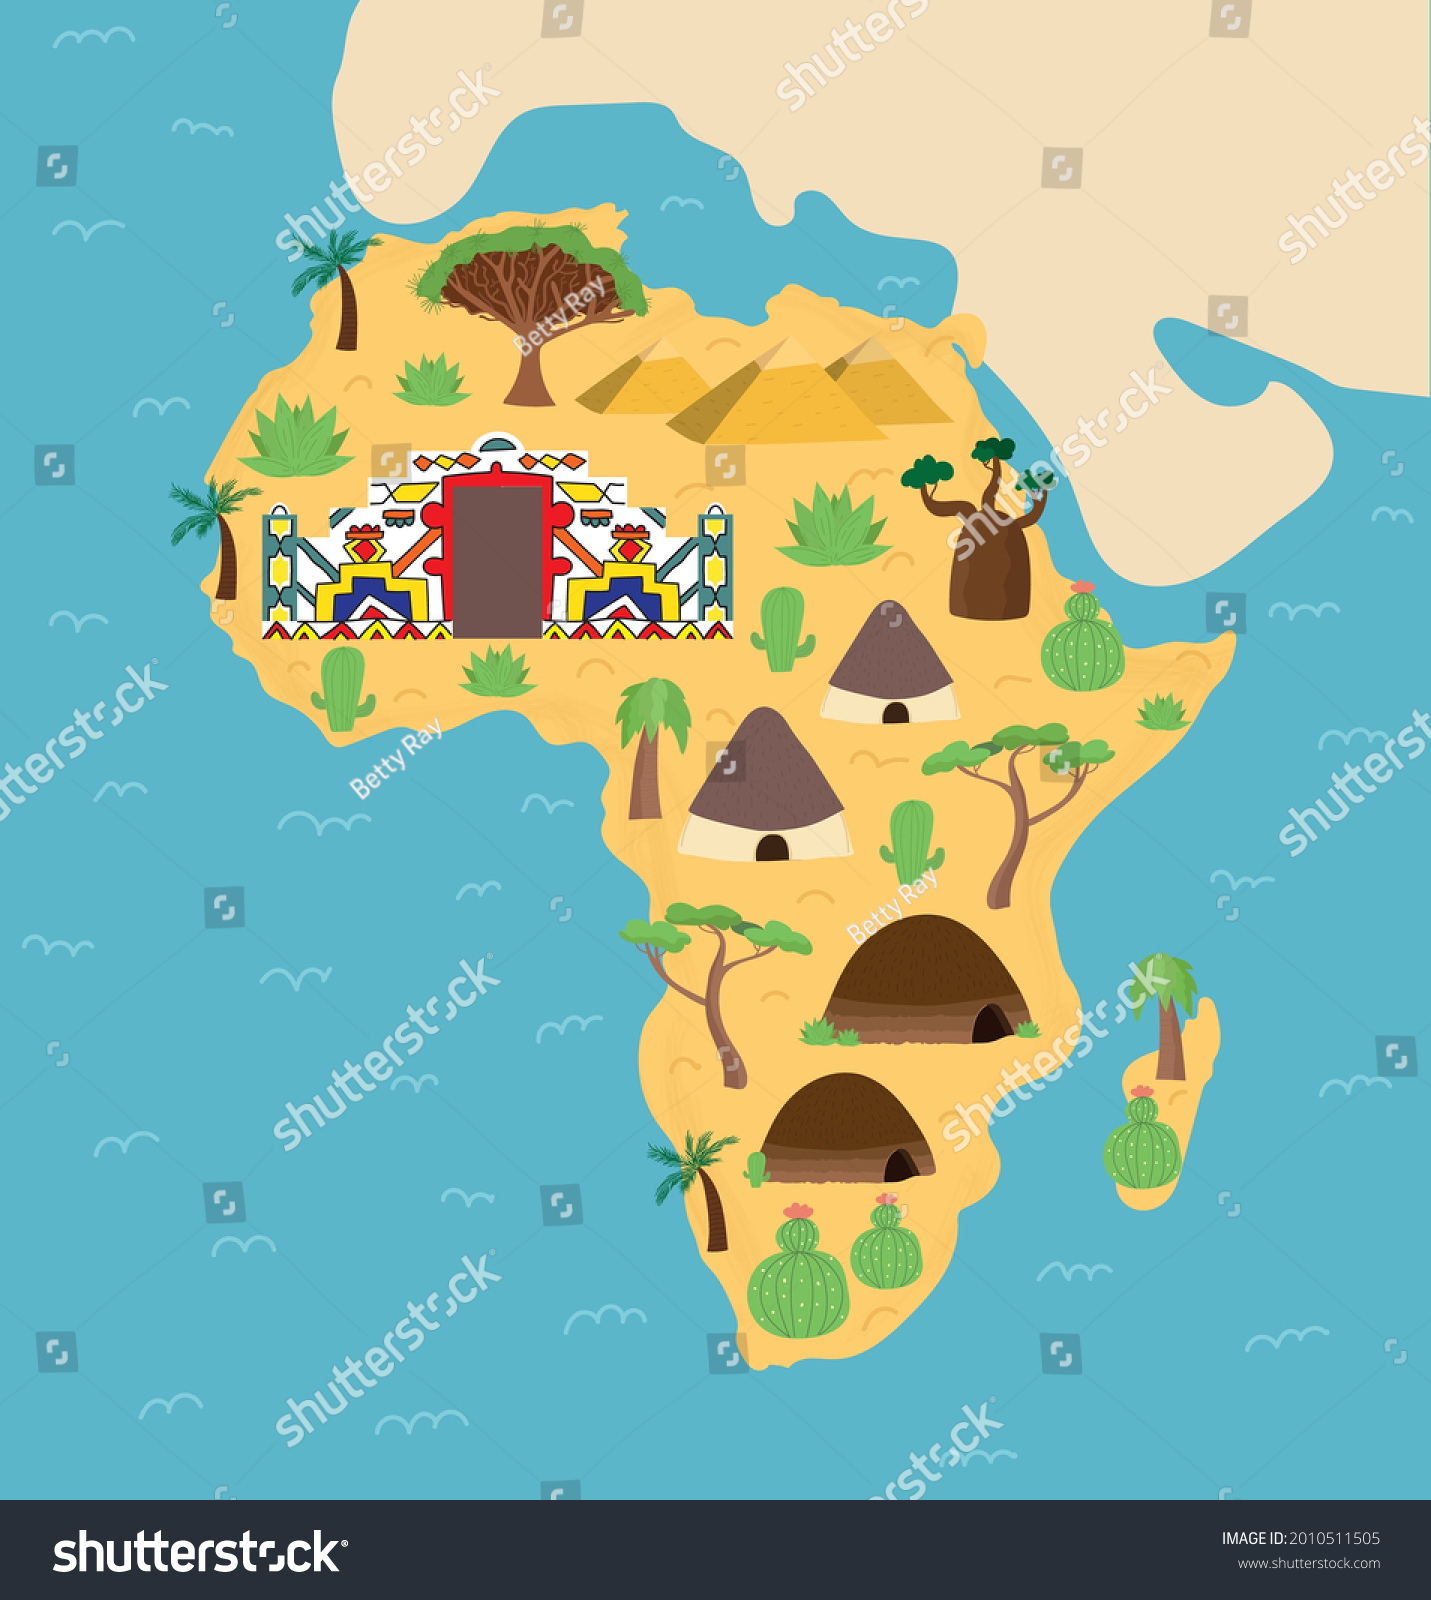 Cartoon Hand Drawn Illustrated Map Africa Stock Vector Royalty Free 2010511505 Shutterstock 4987